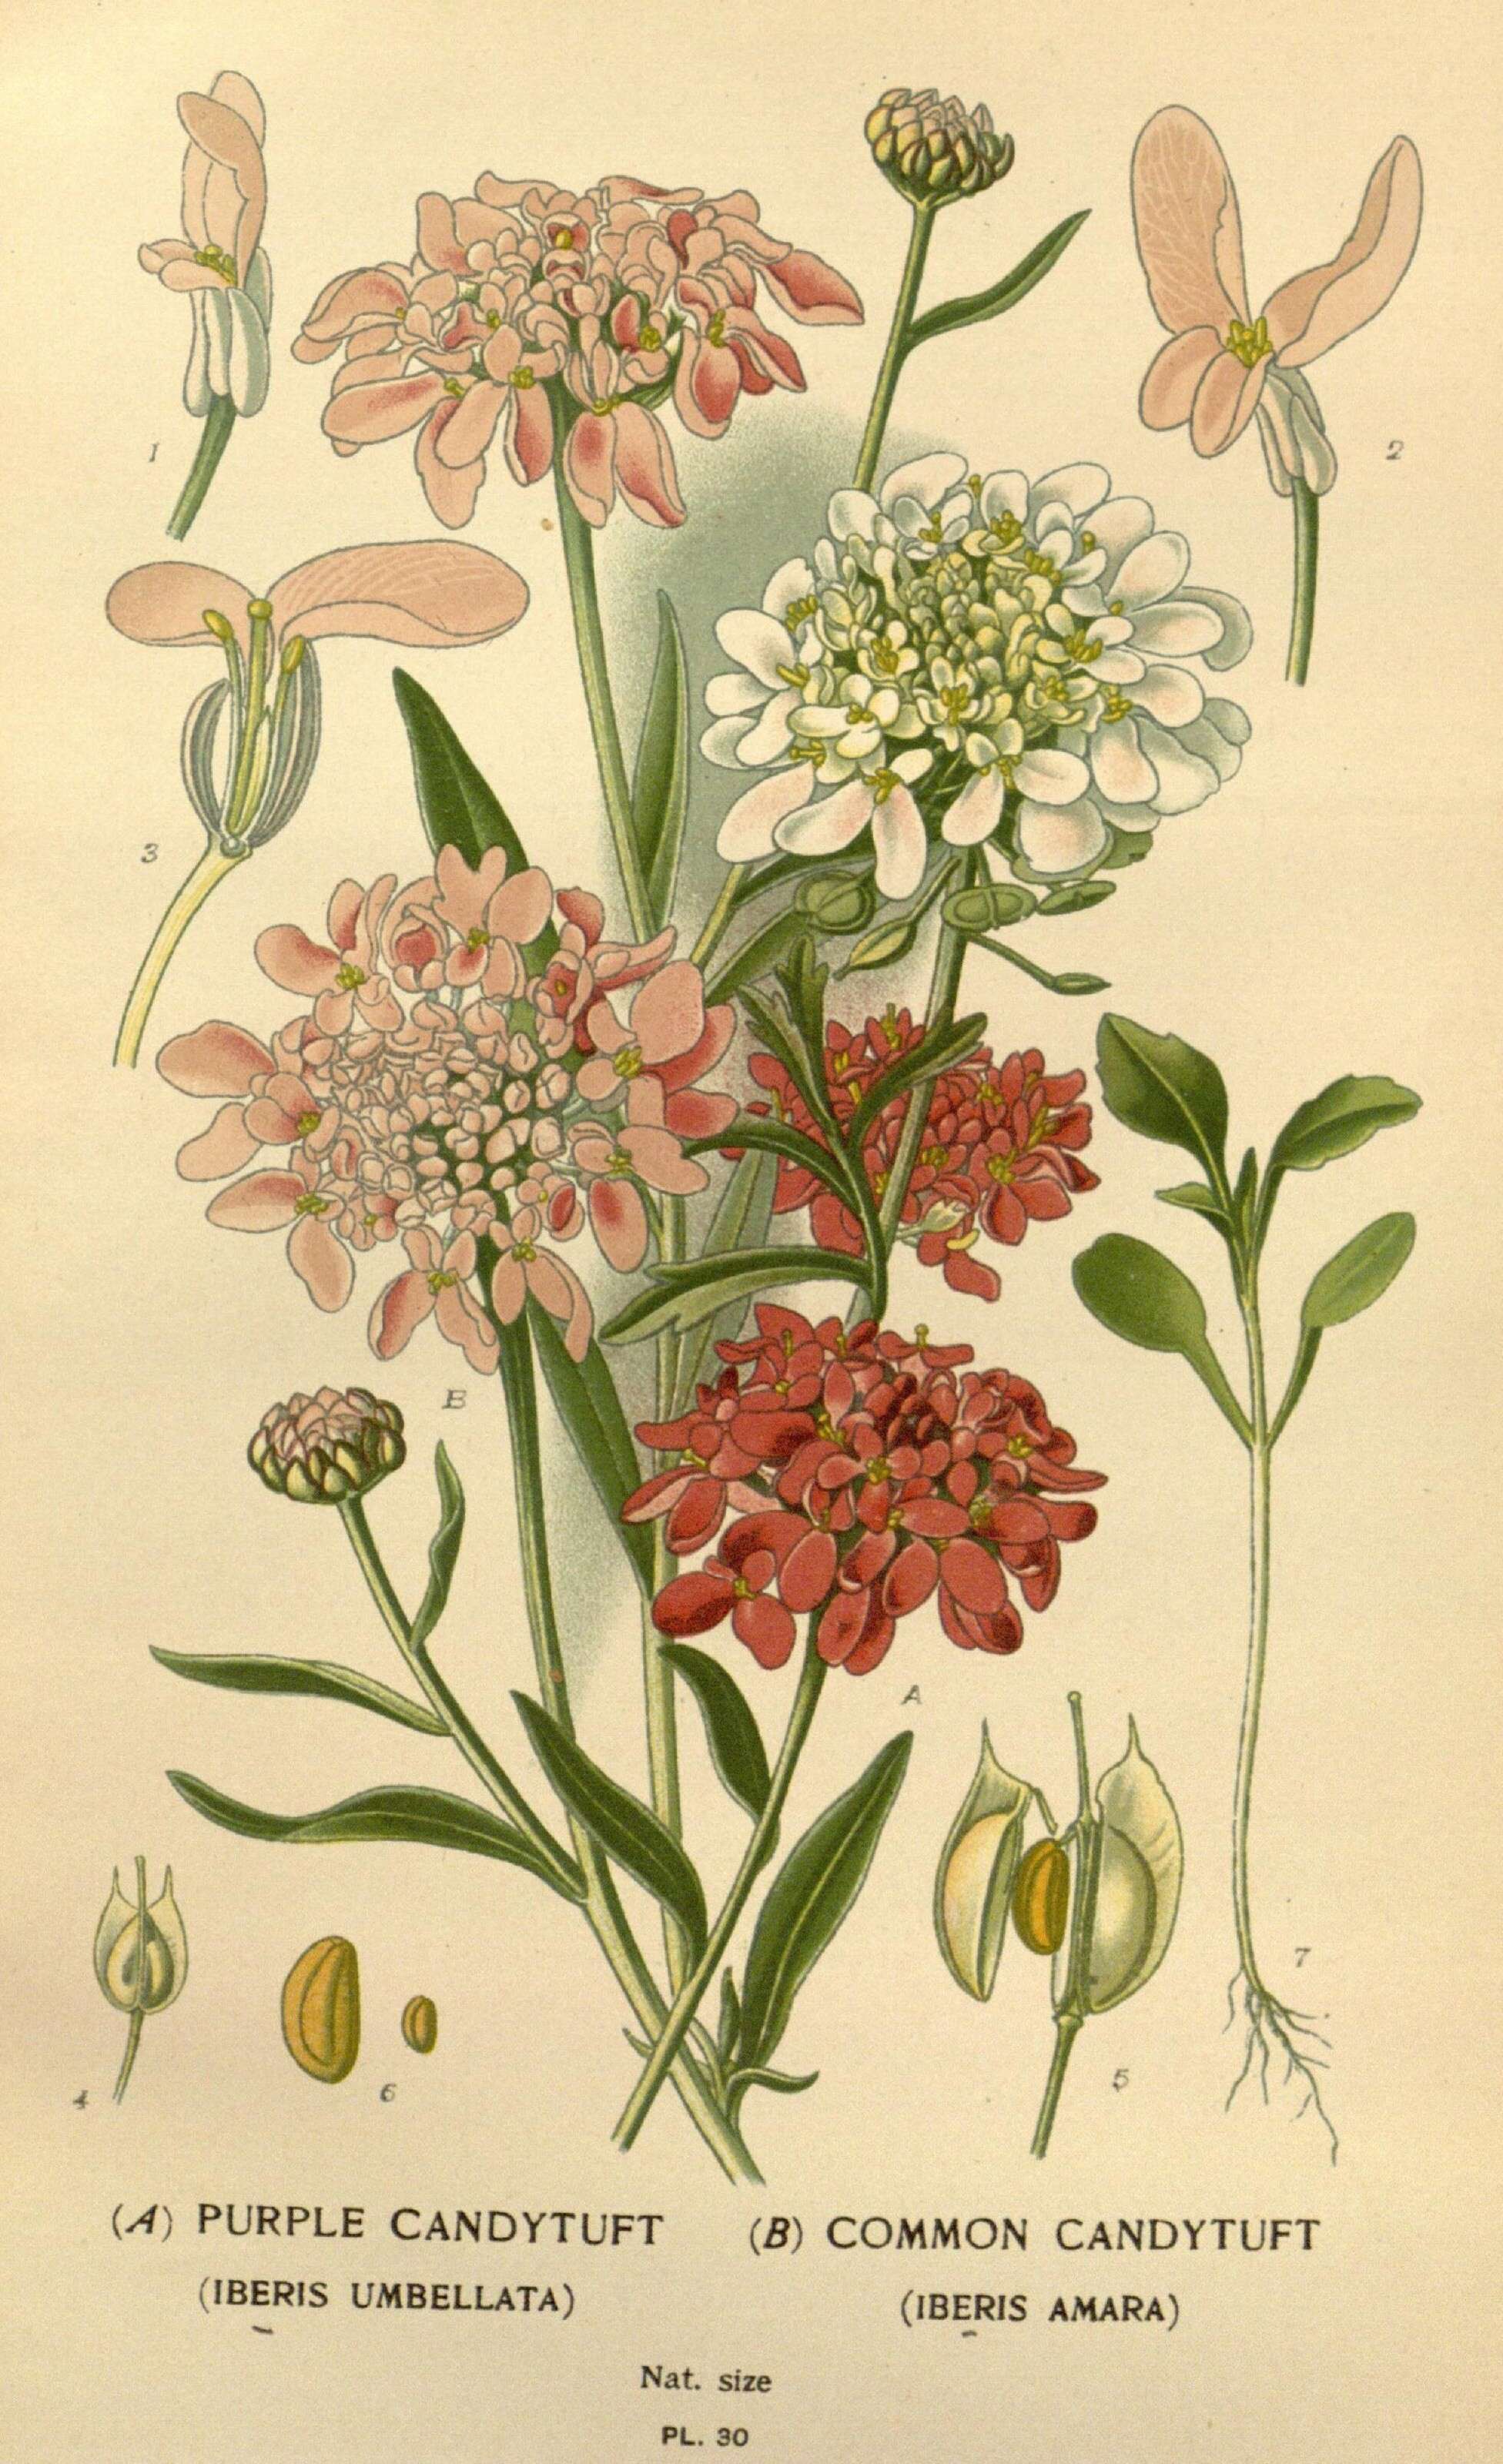 Image of annual candytuft